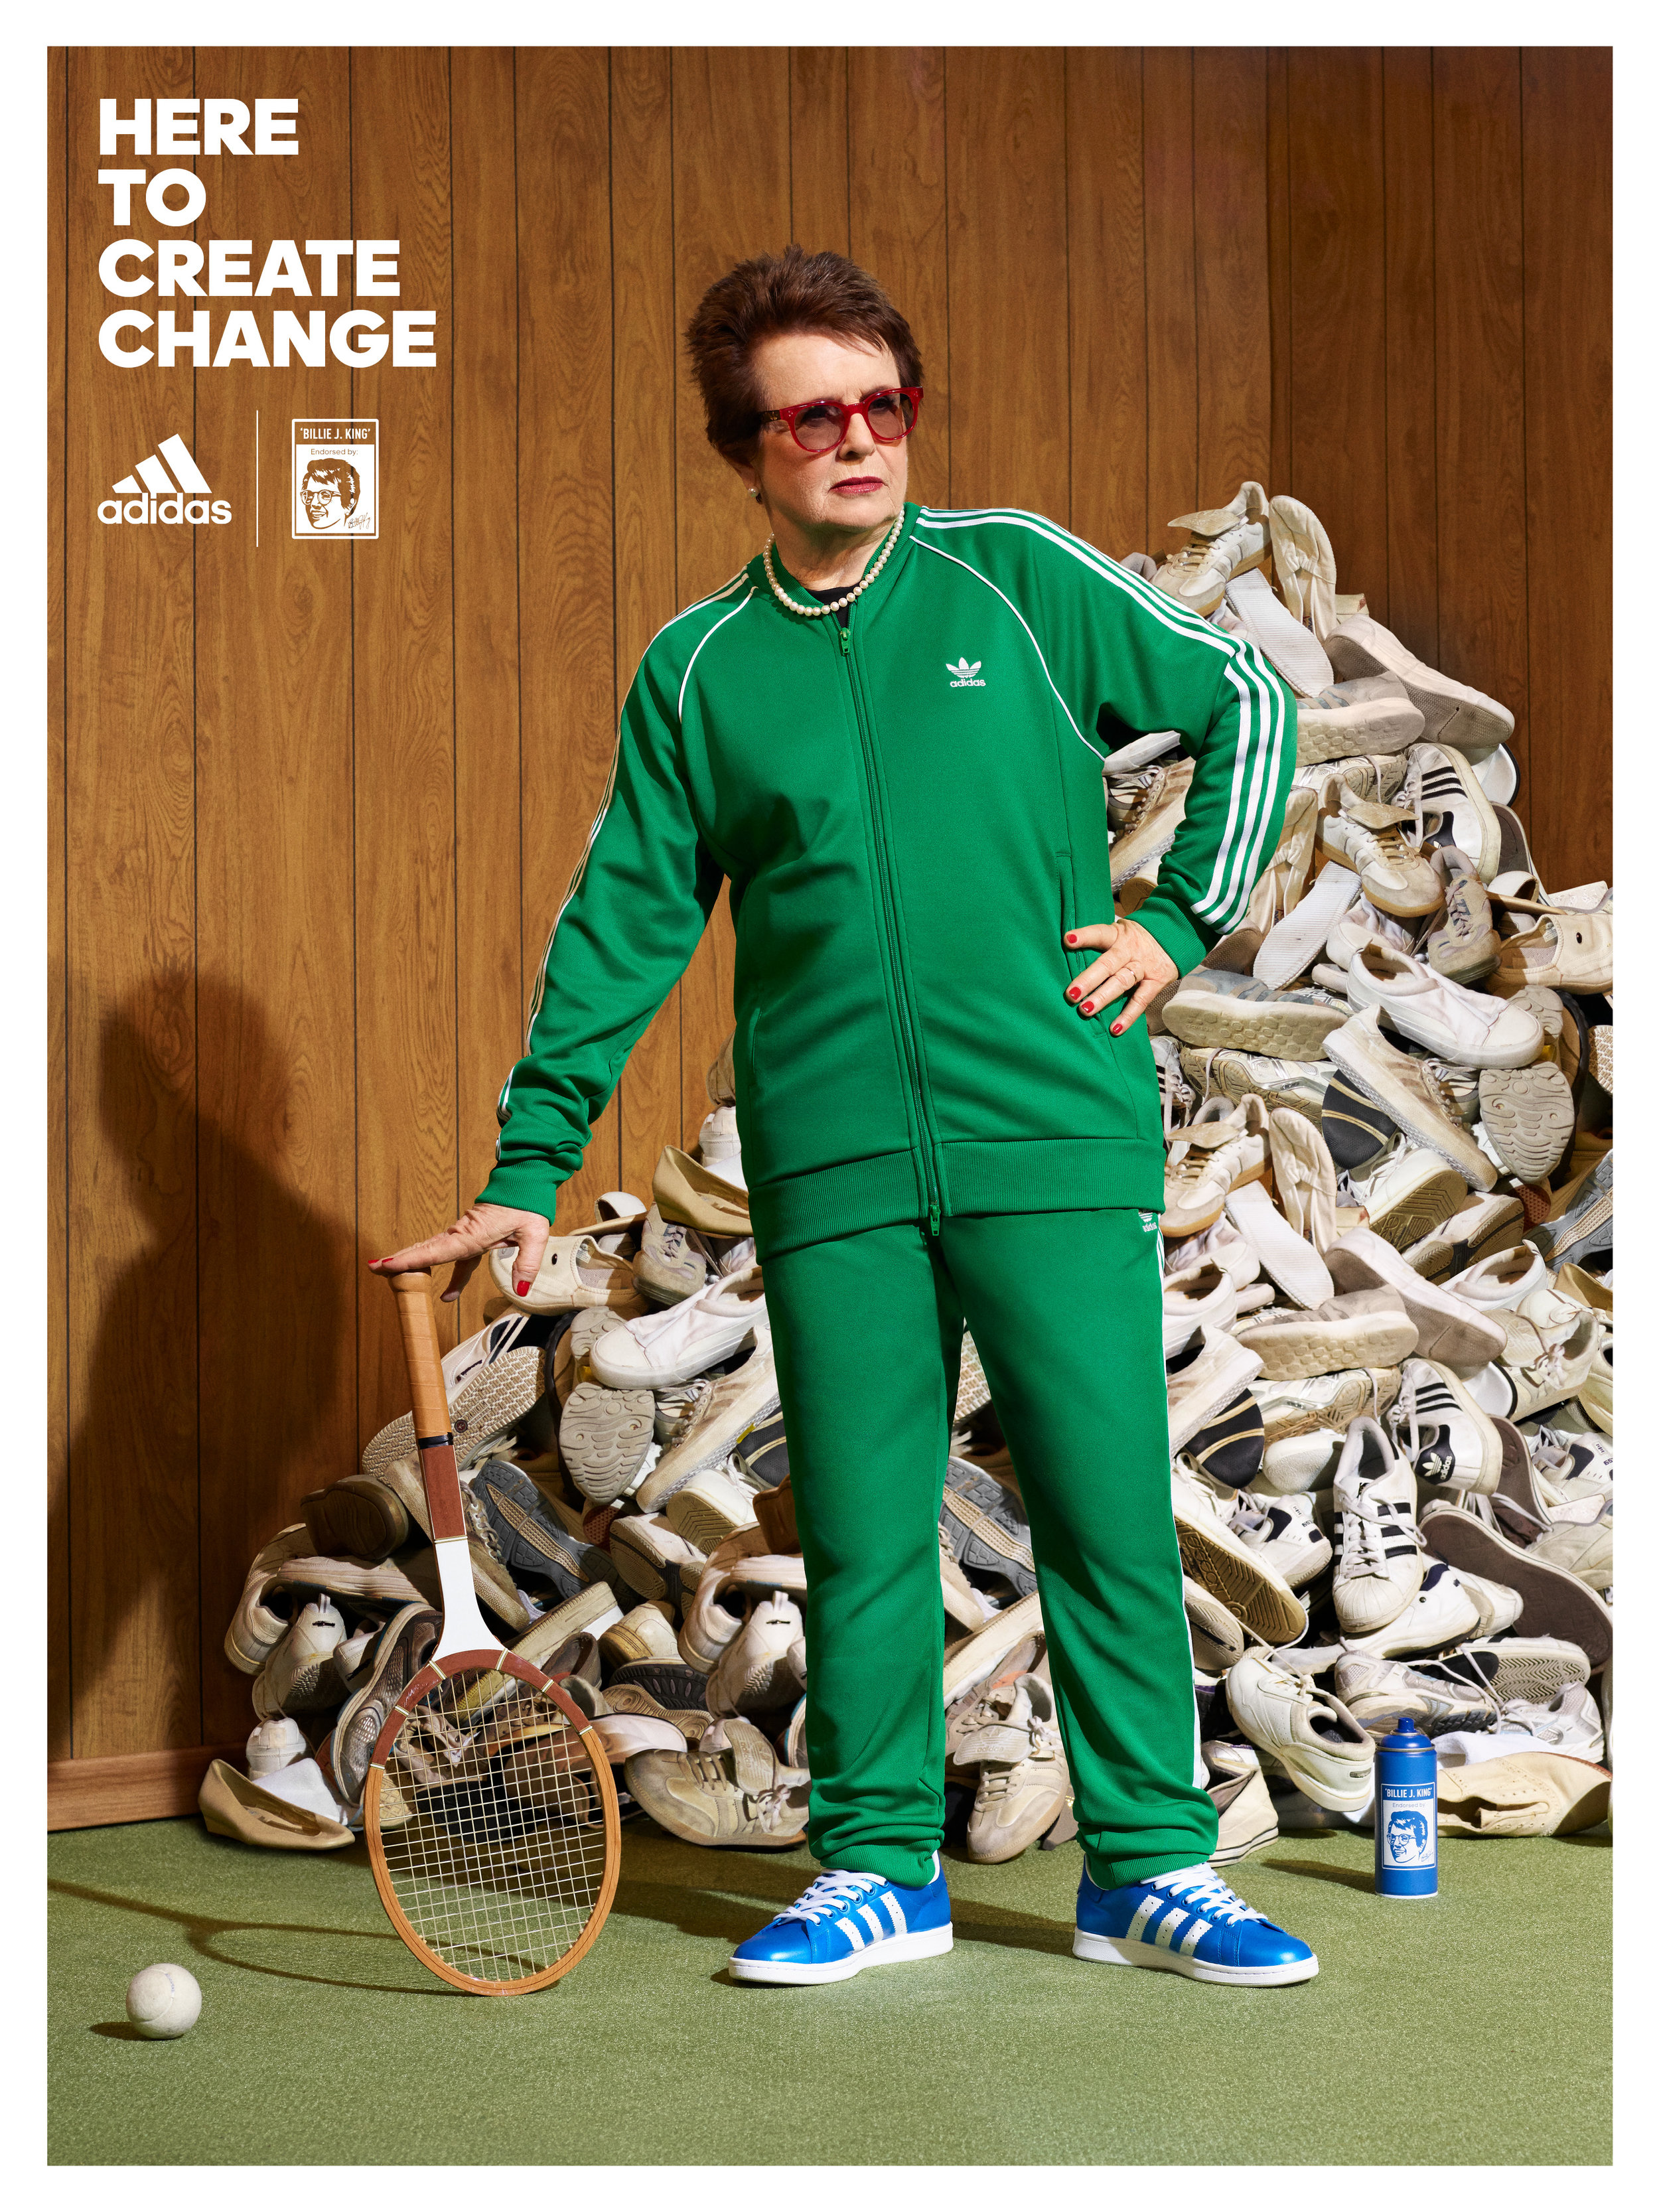 adidas billie jean king your shoes